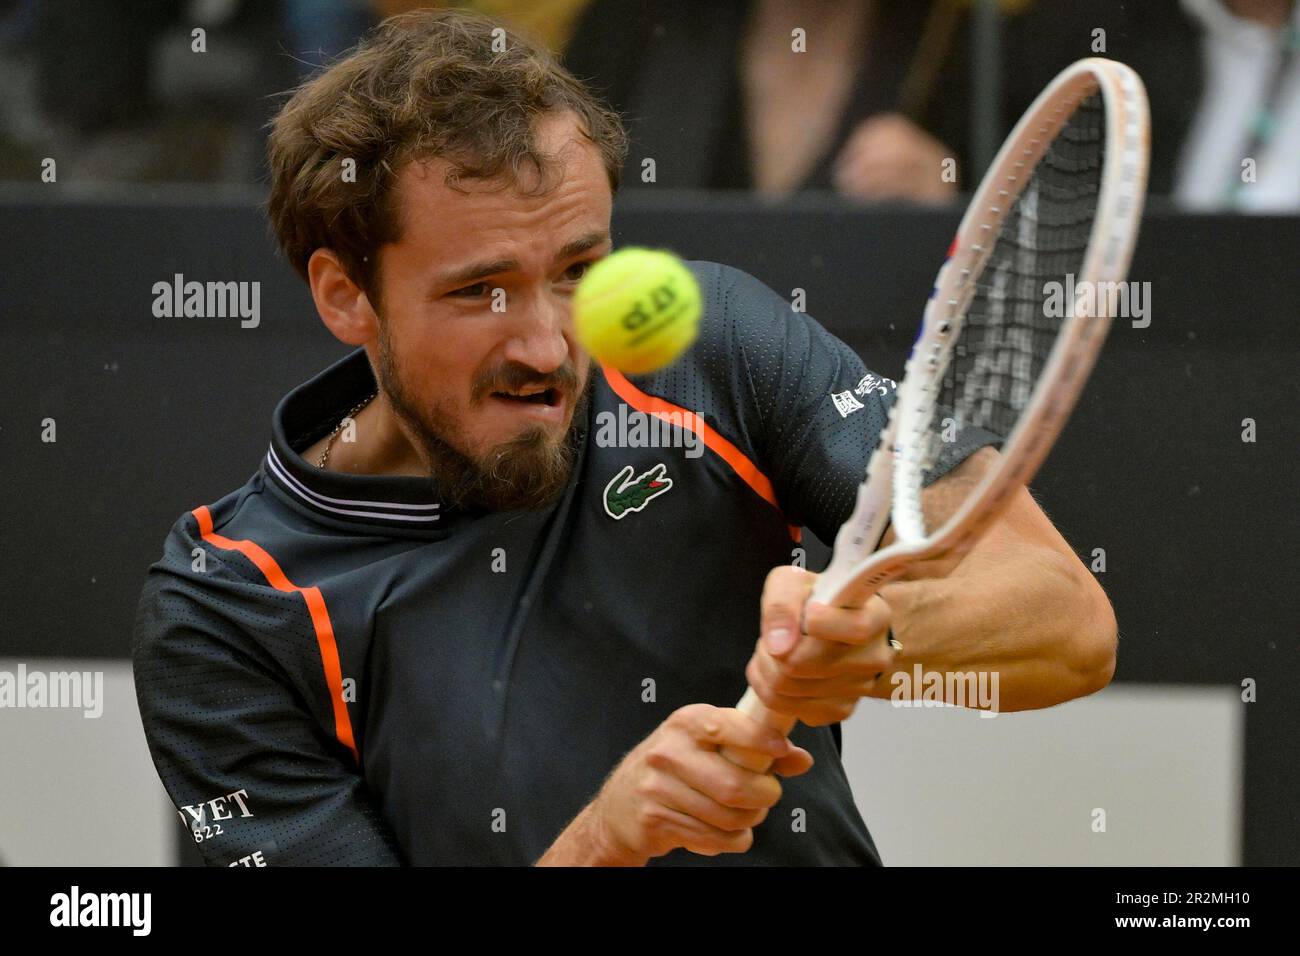 May 20, 2023, ROME Daniil Medvedev of Russia in action during his mens singles semi final match against Stefanos Tsitsipas of Greece (not pictured) at the Italian Open tennis tournament in Rome,